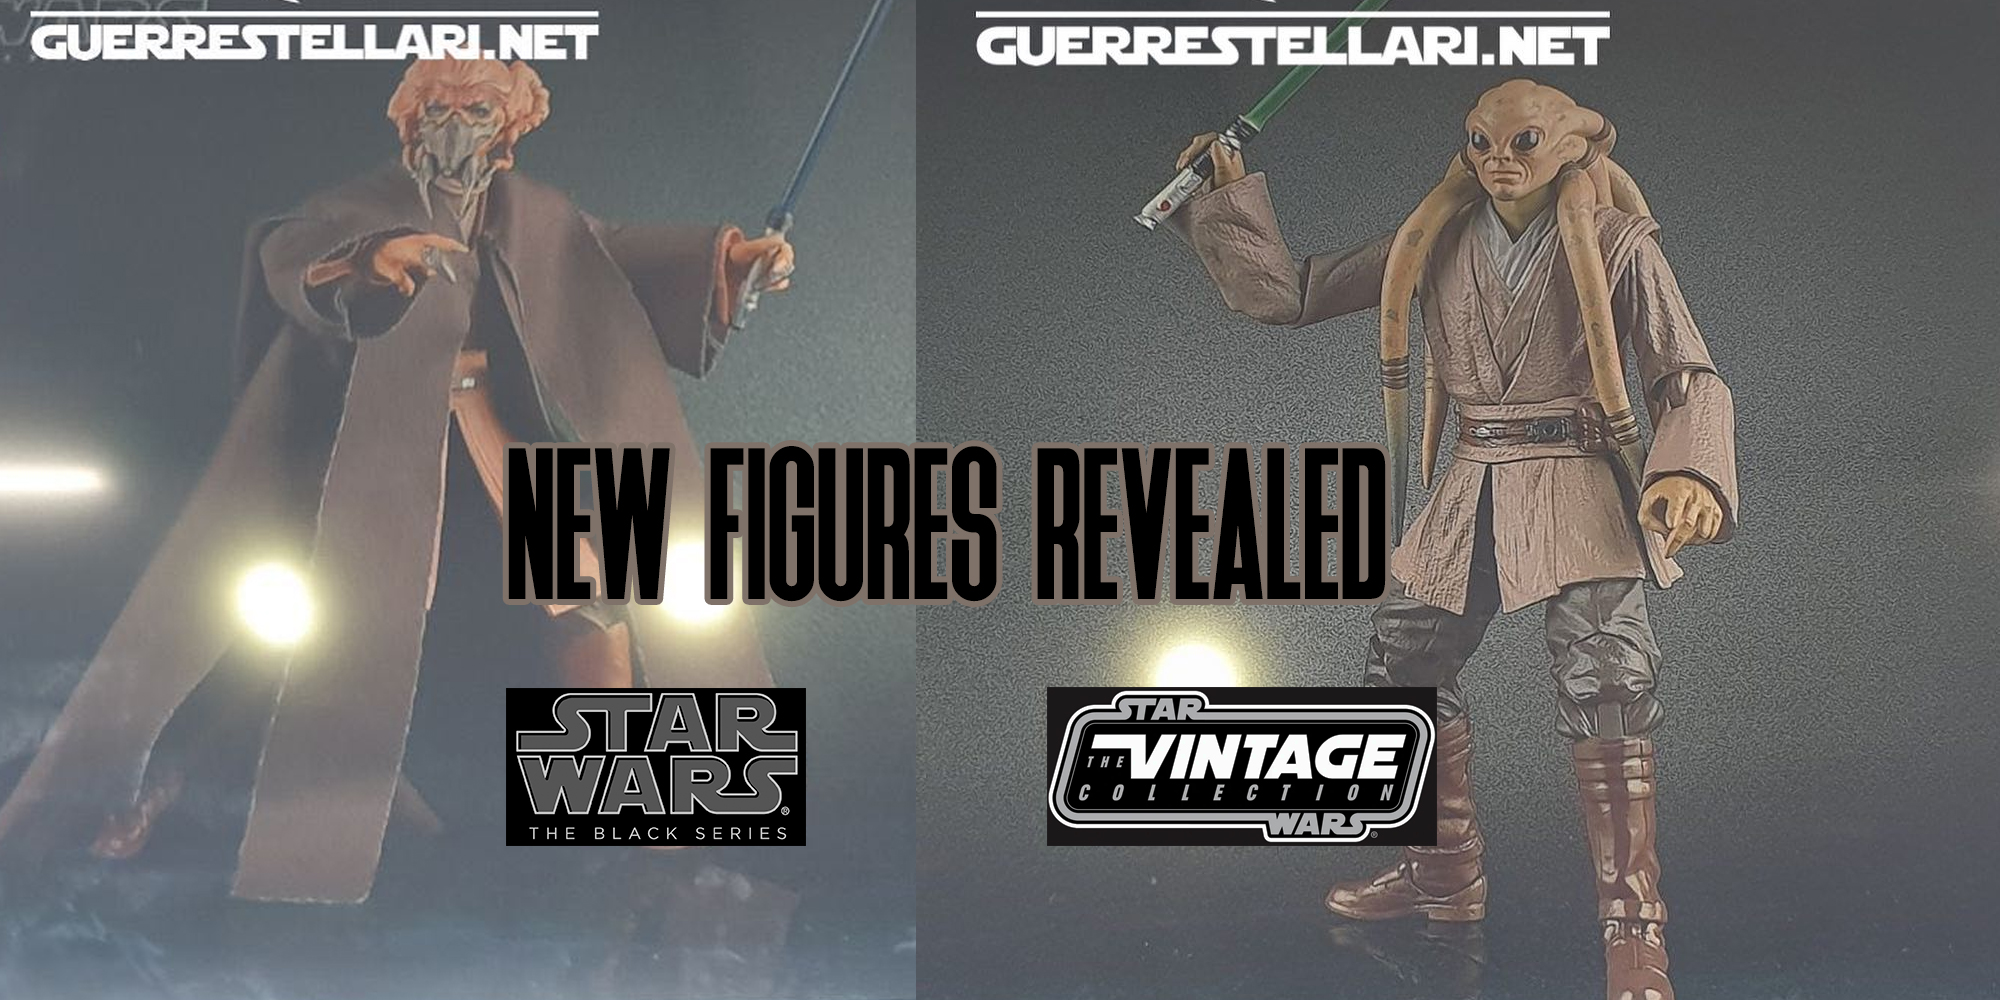 More Figure Reveals For 2020!